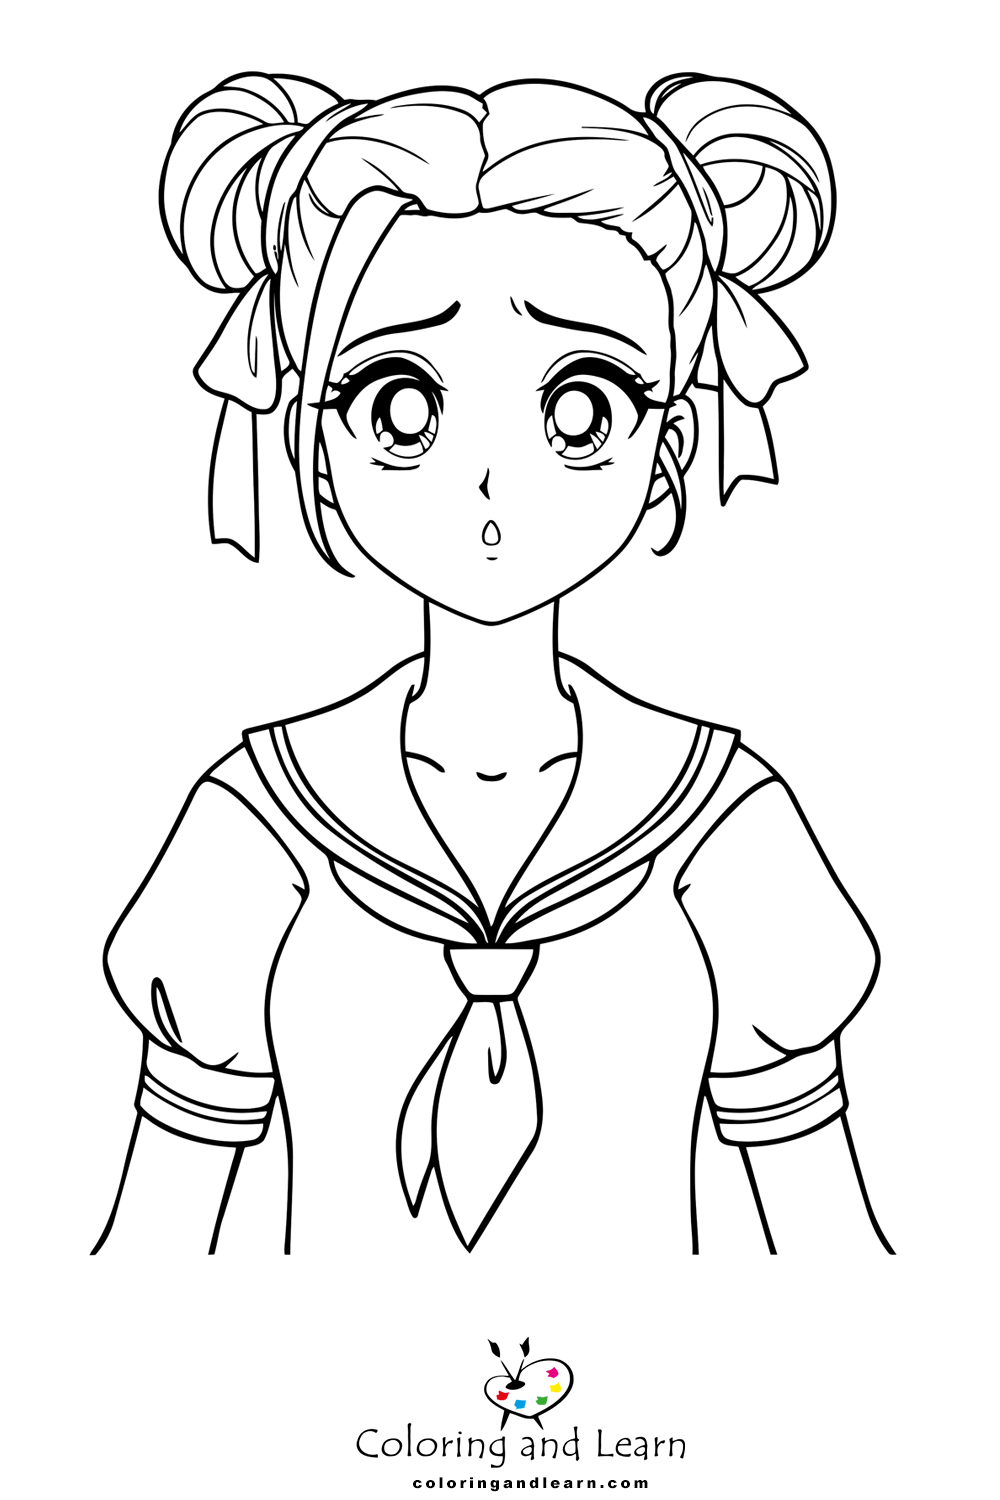 Get This Anime Girl Coloring Pages Printable fd27 !